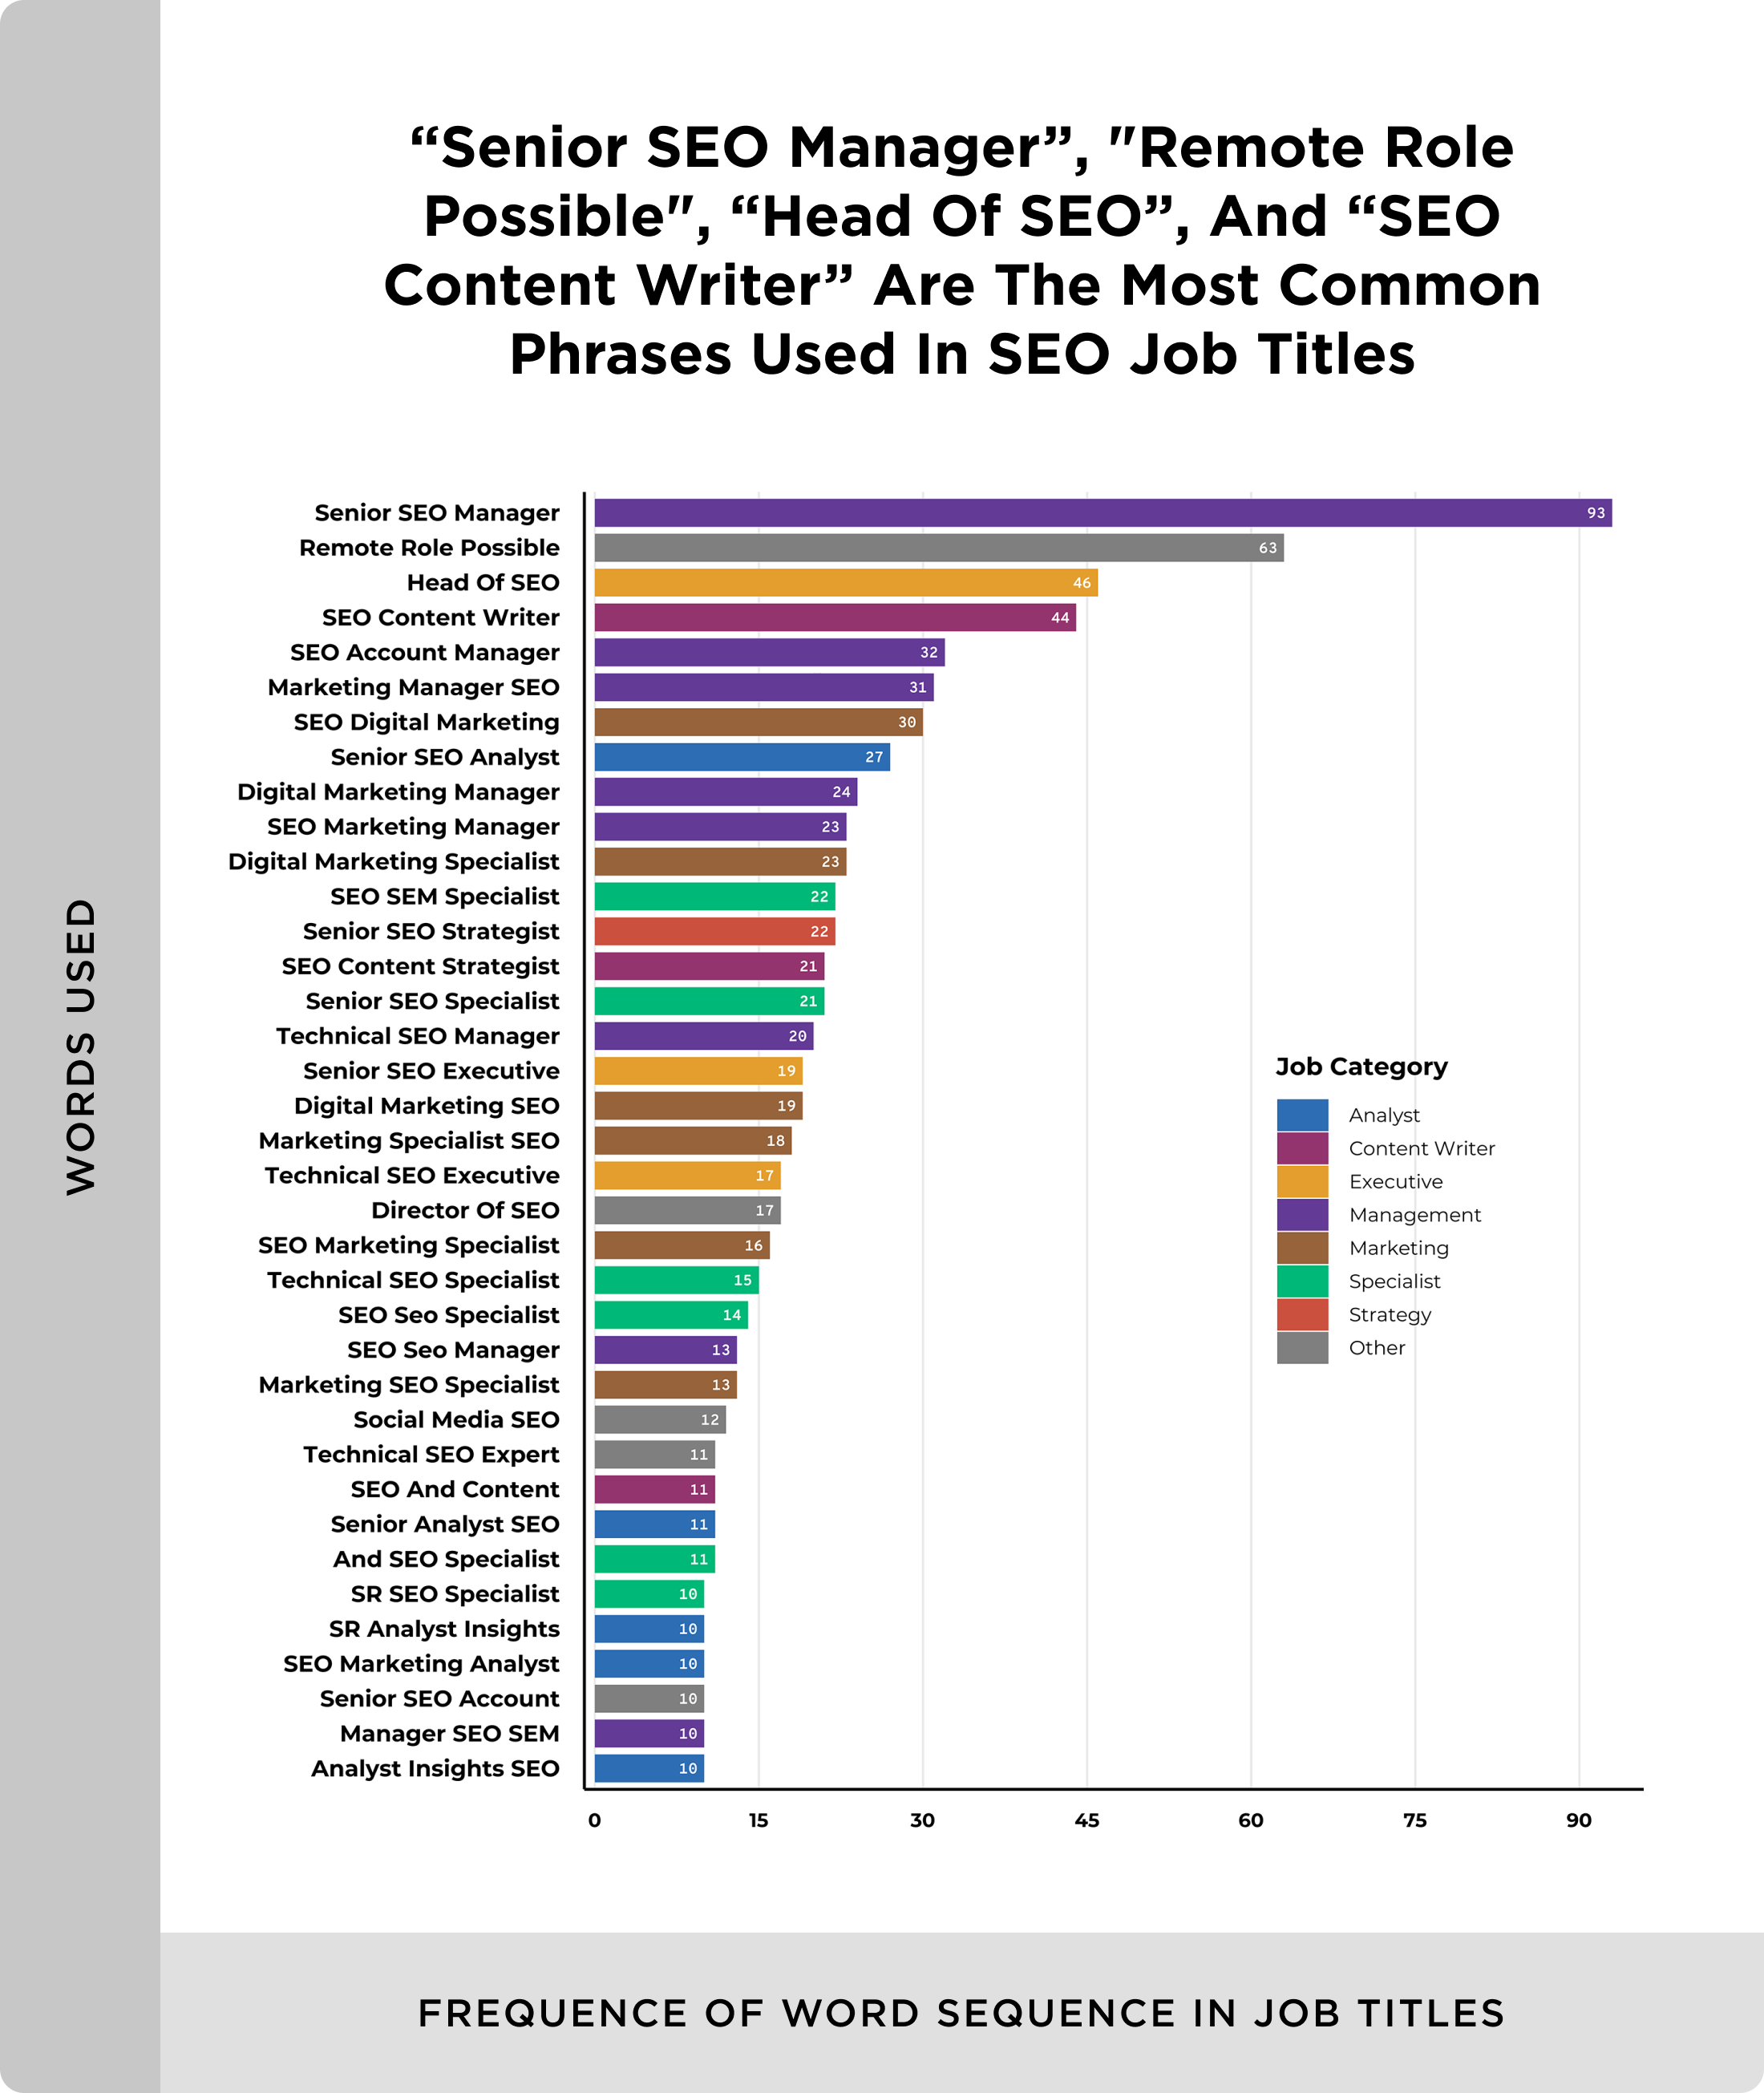 Most common phrases in SEO job titles